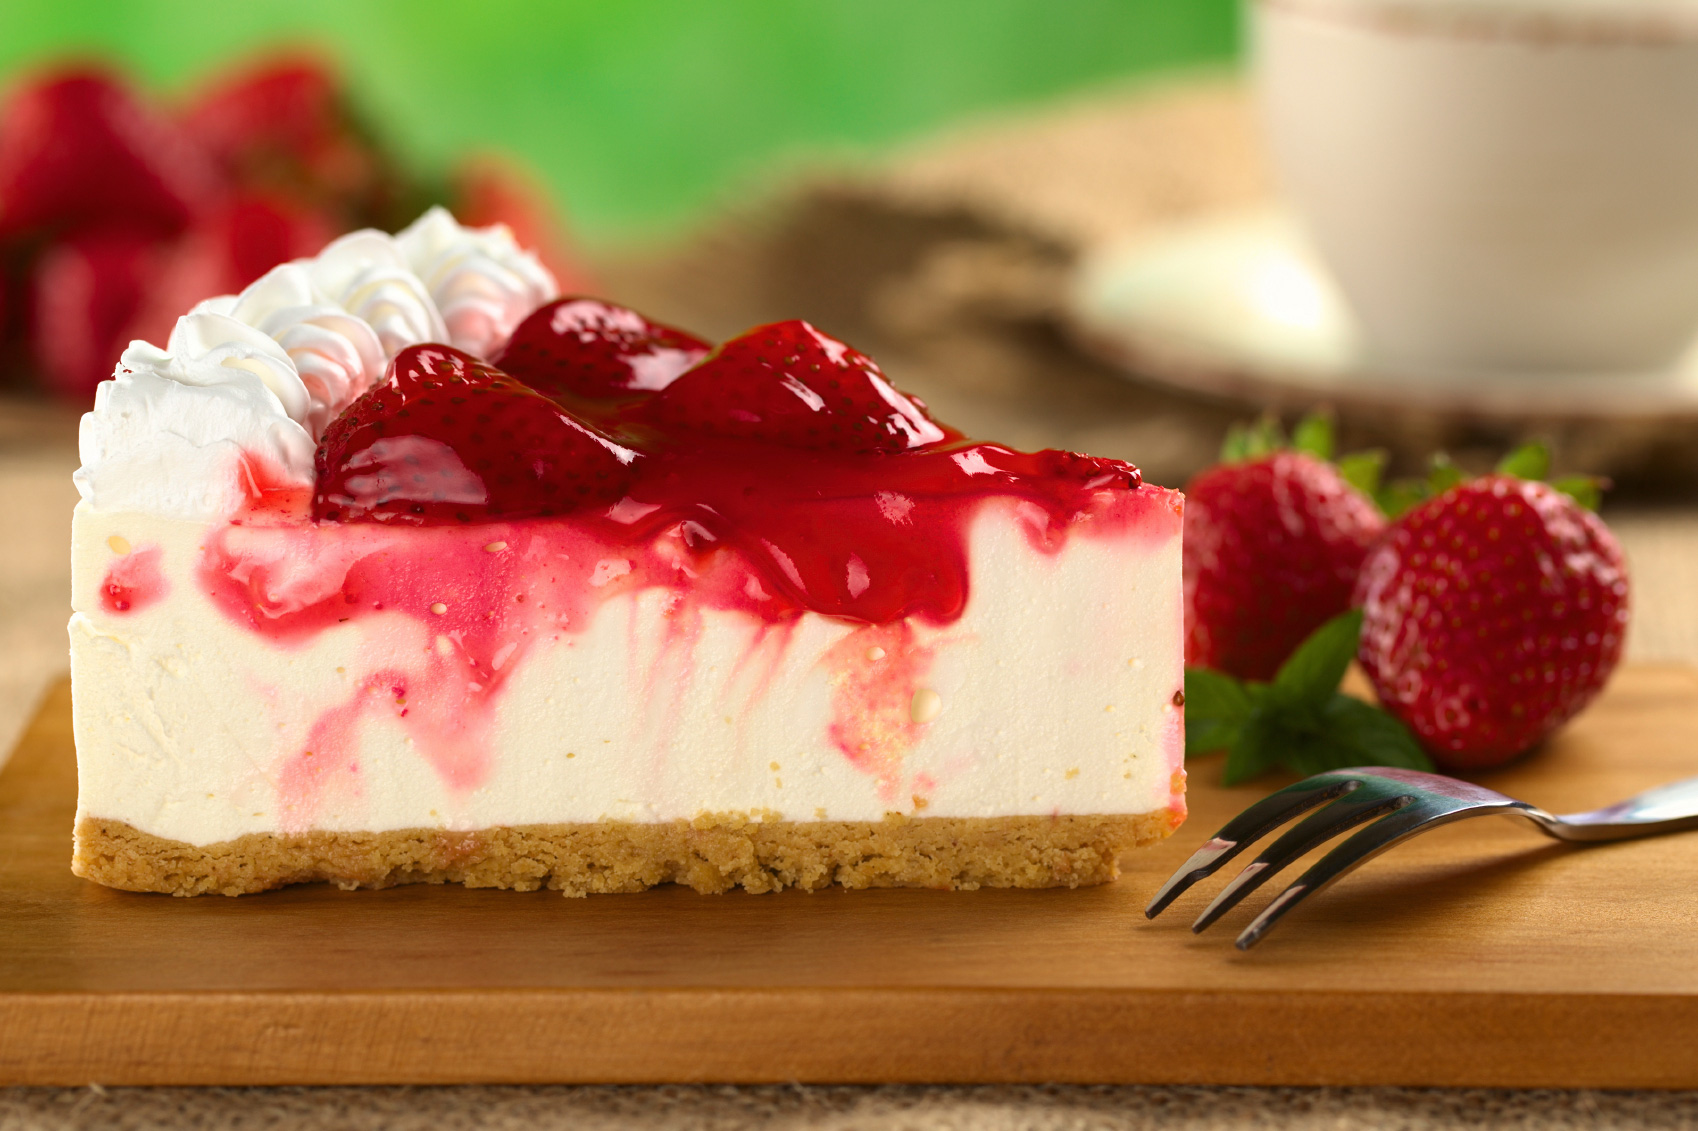 Strawberry Cheesecake with Strawberry Syrup